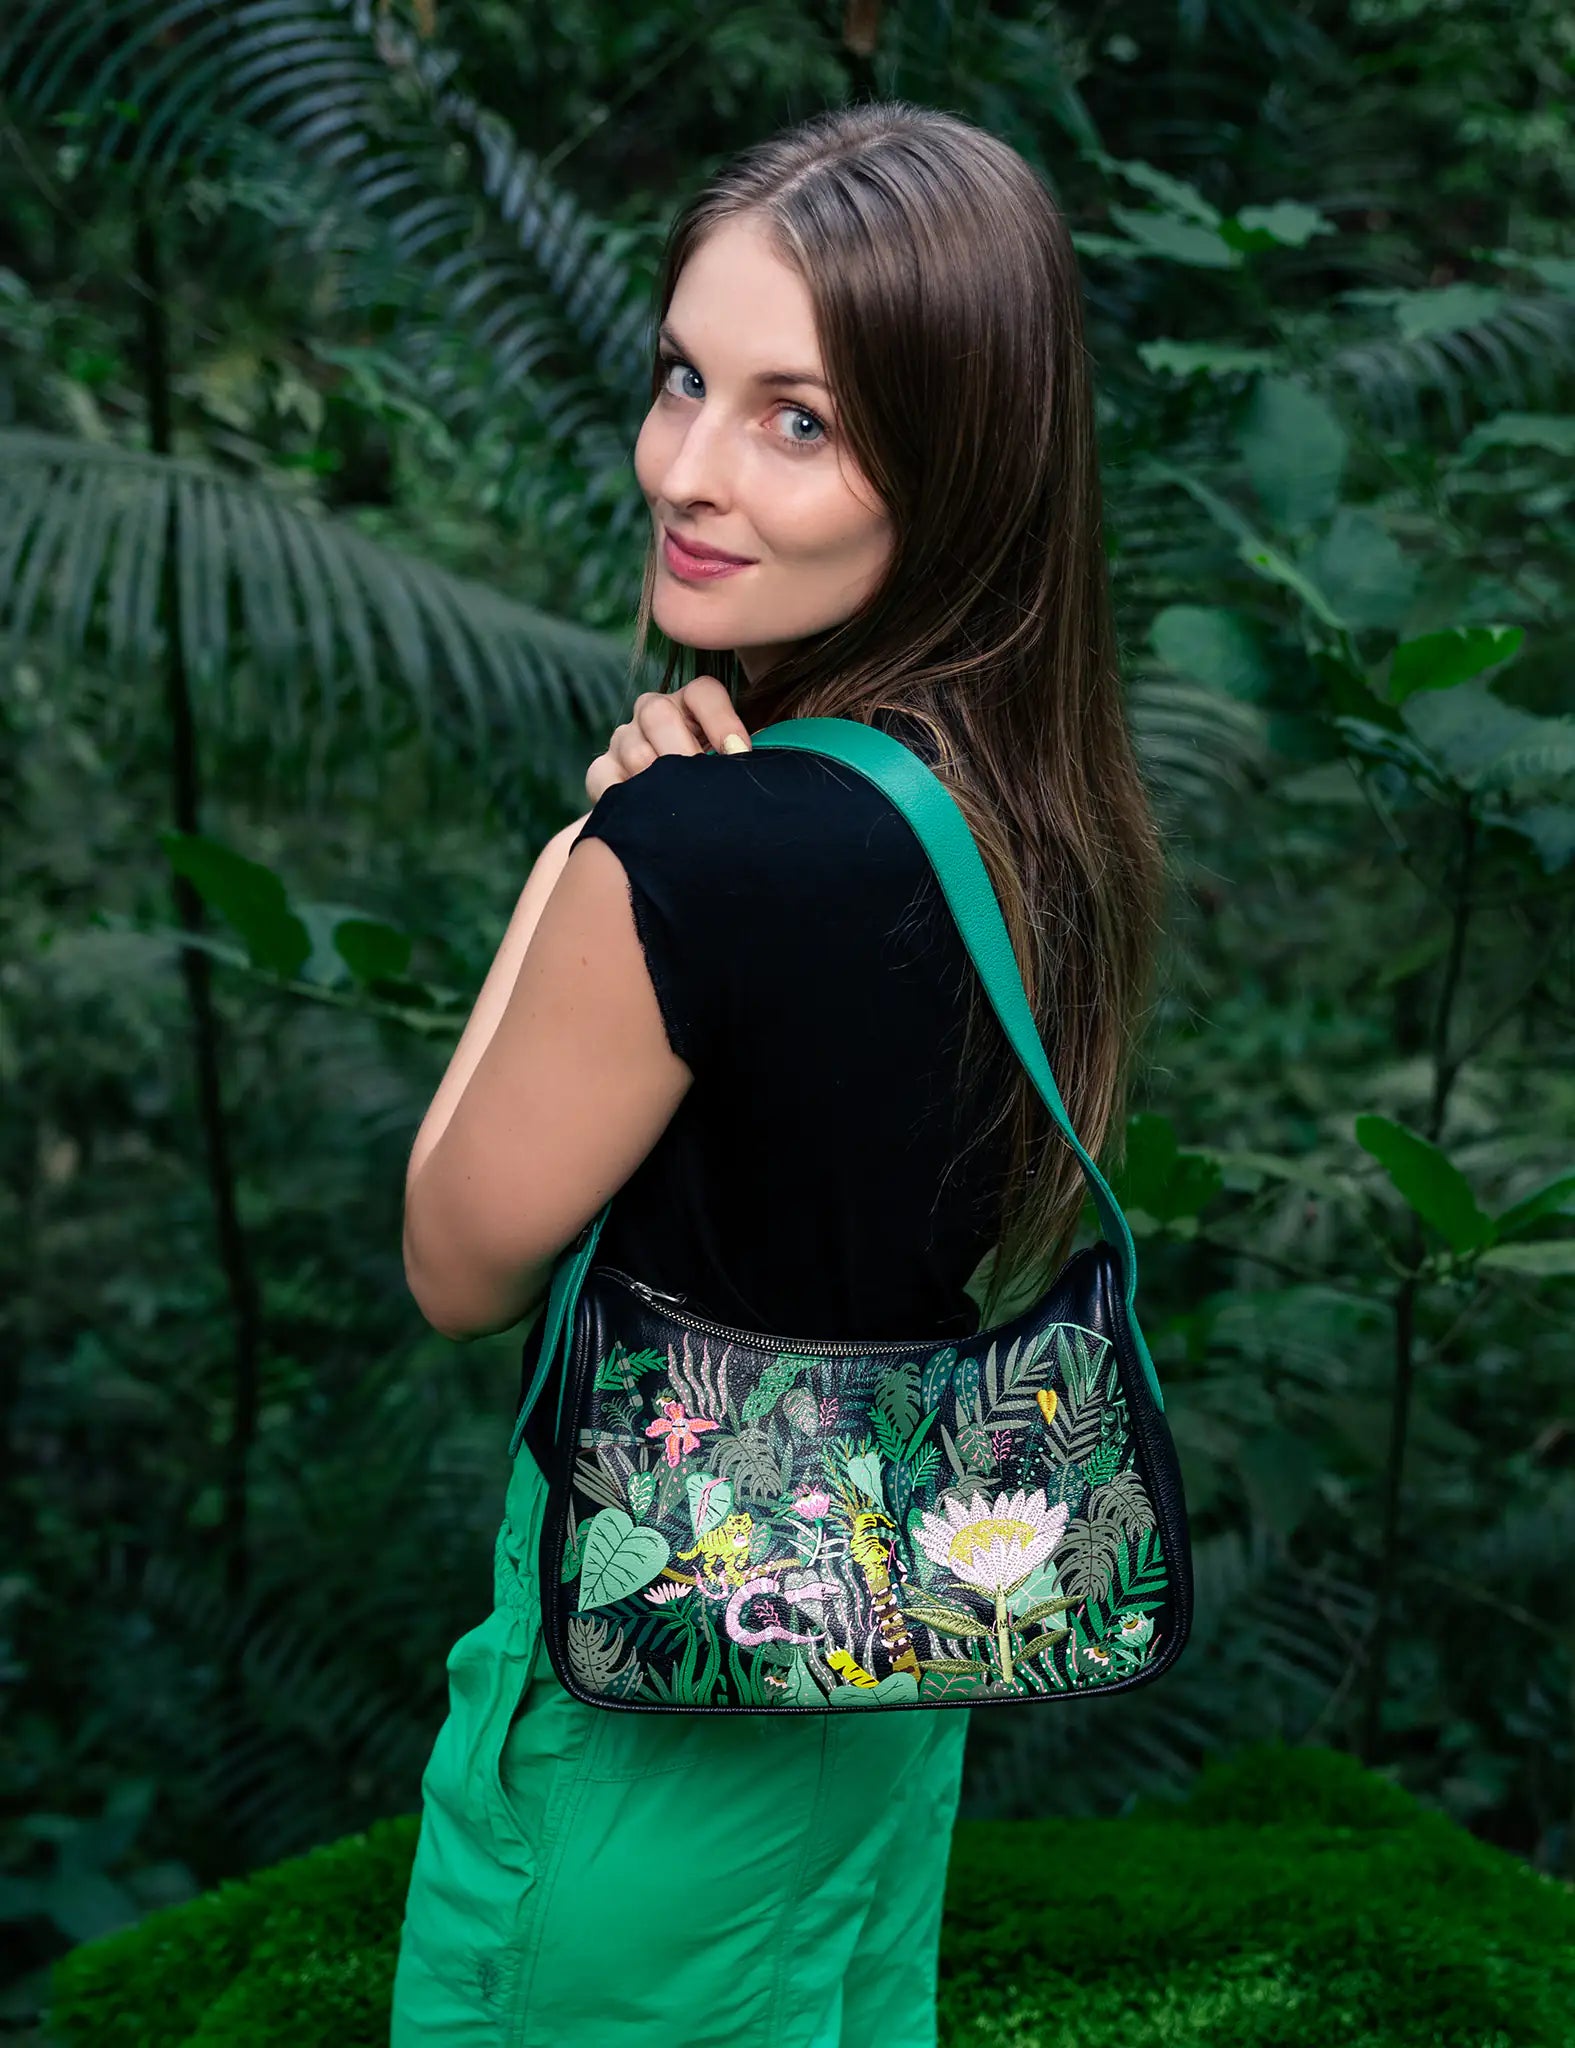 A young woman with long brown hair is standing in a lush, green forest. She is wearing a black sleeveless top and green pants. Over her shoulder, she carries a Vynil Hobo leather handbag by Min & Mon, a NYC-based brand. The handbag features a vibrant, jungle-inspired design with intricate botanical and animal motifs.